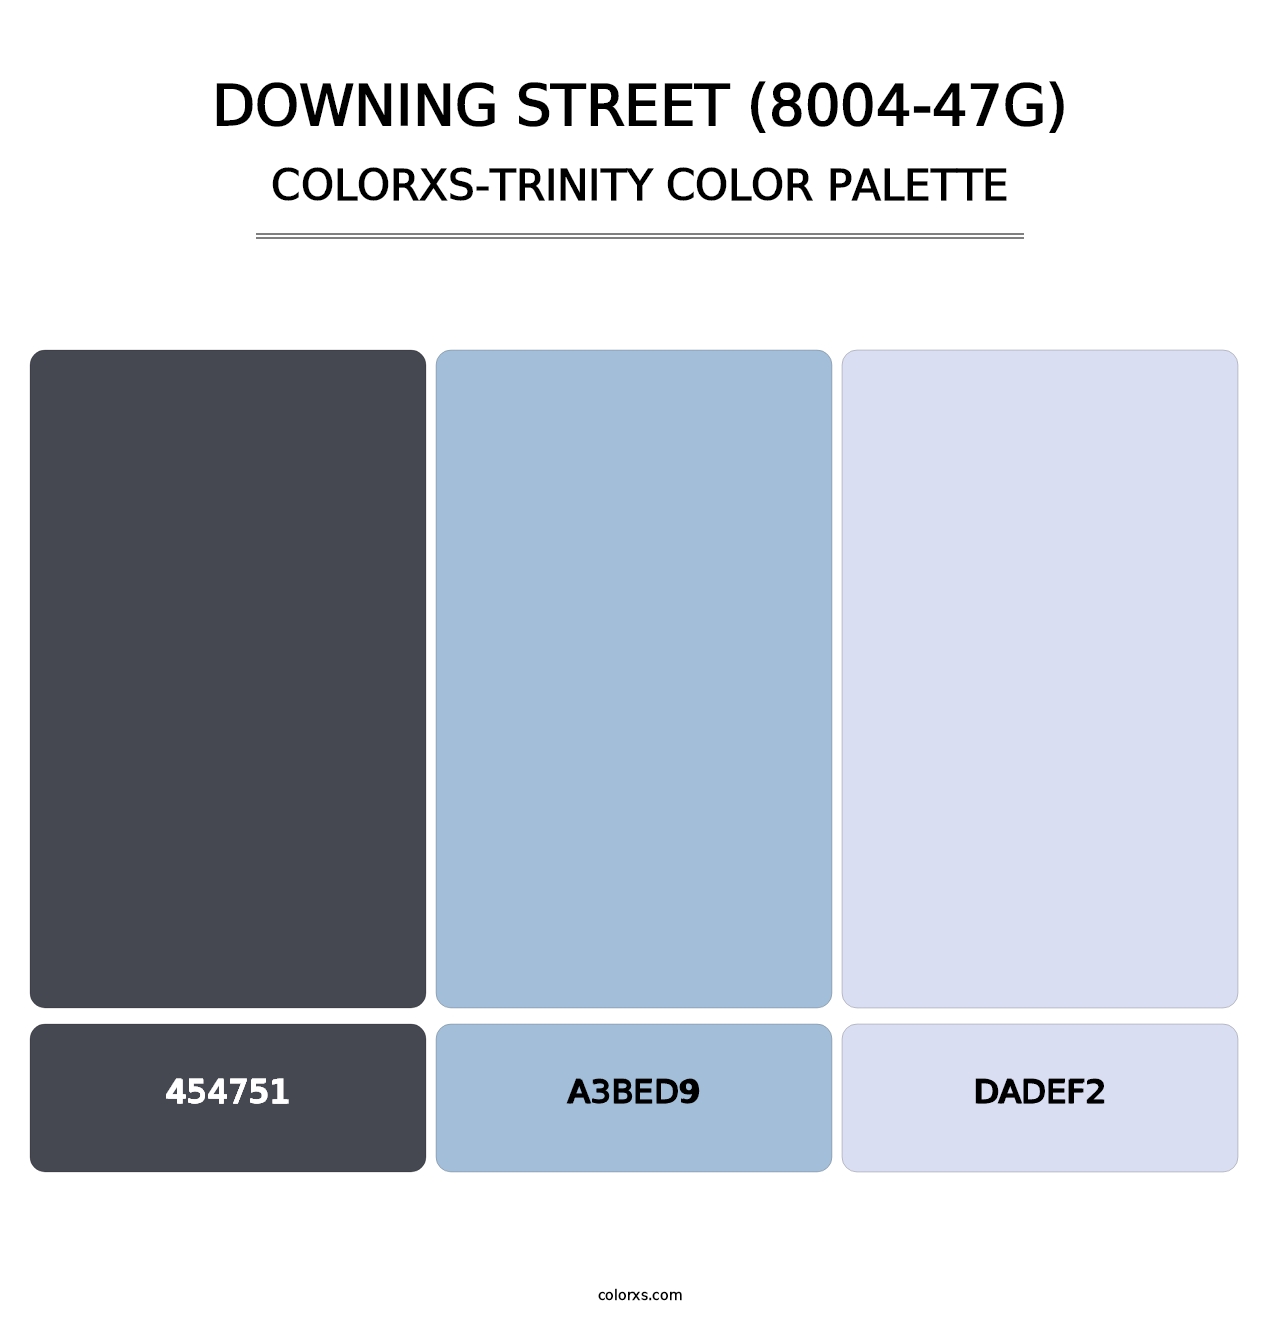 Downing Street (8004-47G) - Colorxs Trinity Palette